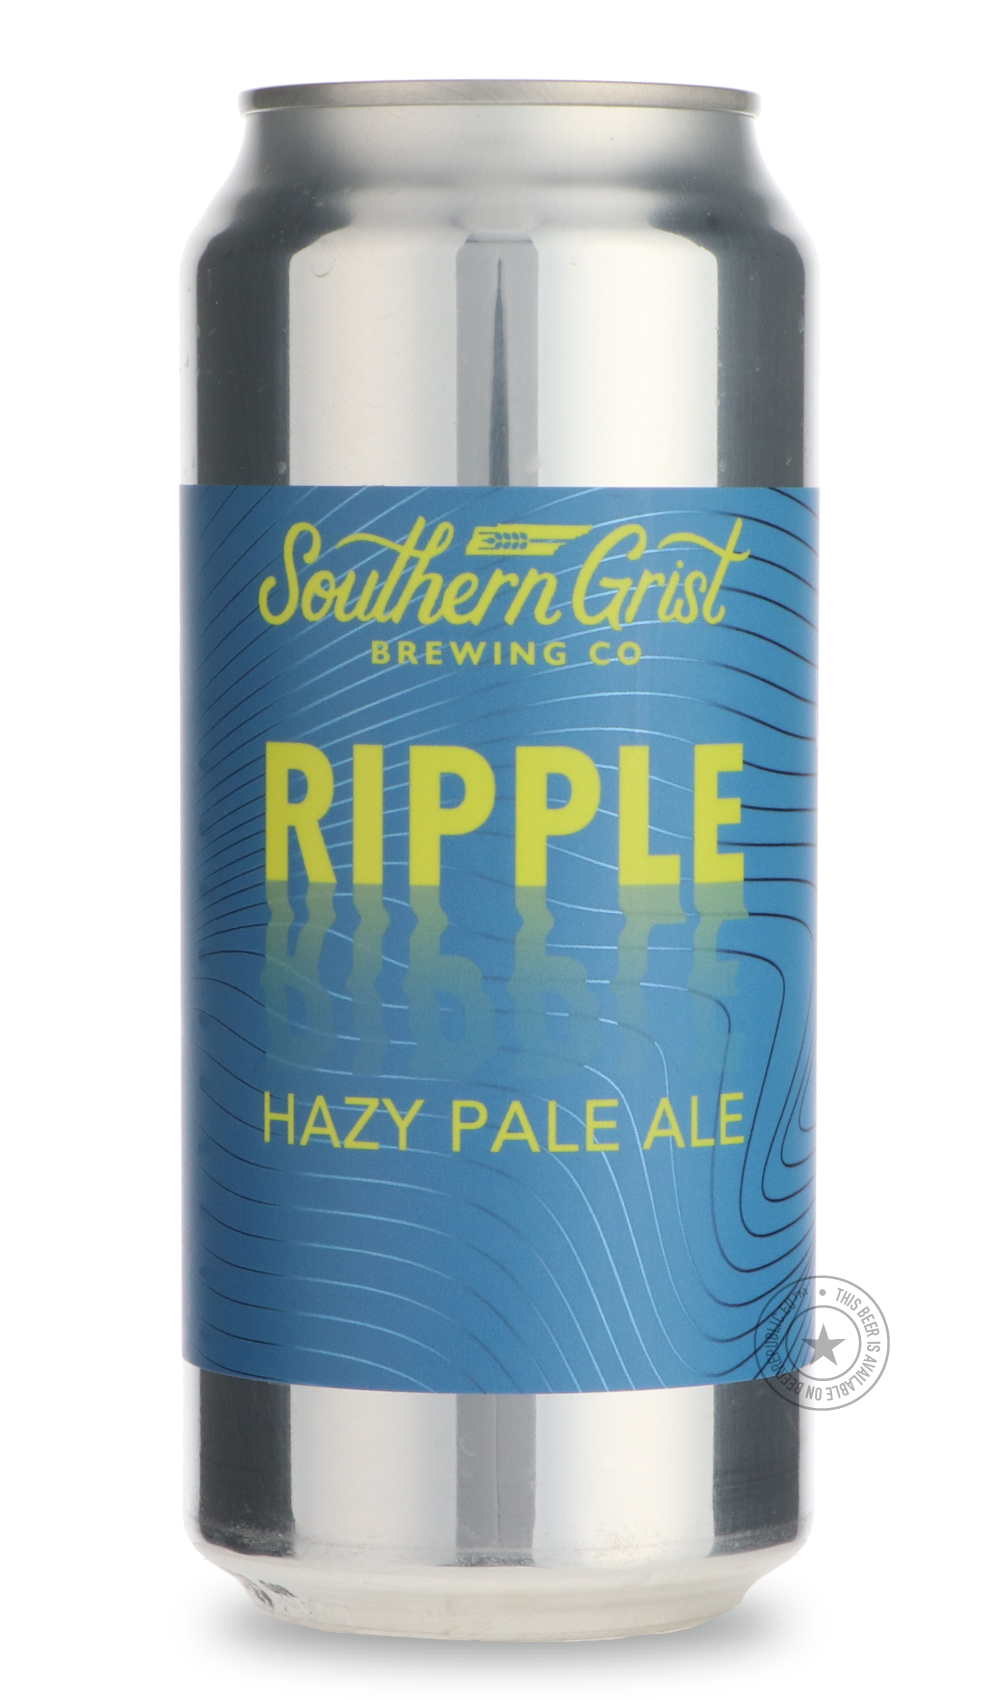 -Southern Grist- Ripple-Pale- Only @ Beer Republic - The best online beer store for American & Canadian craft beer - Buy beer online from the USA and Canada - Bier online kopen - Amerikaans bier kopen - Craft beer store - Craft beer kopen - Amerikanisch bier kaufen - Bier online kaufen - Acheter biere online - IPA - Stout - Porter - New England IPA - Hazy IPA - Imperial Stout - Barrel Aged - Barrel Aged Imperial Stout - Brown - Dark beer - Blond - Blonde - Pilsner - Lager - Wheat - Weizen - Amber - Barley W